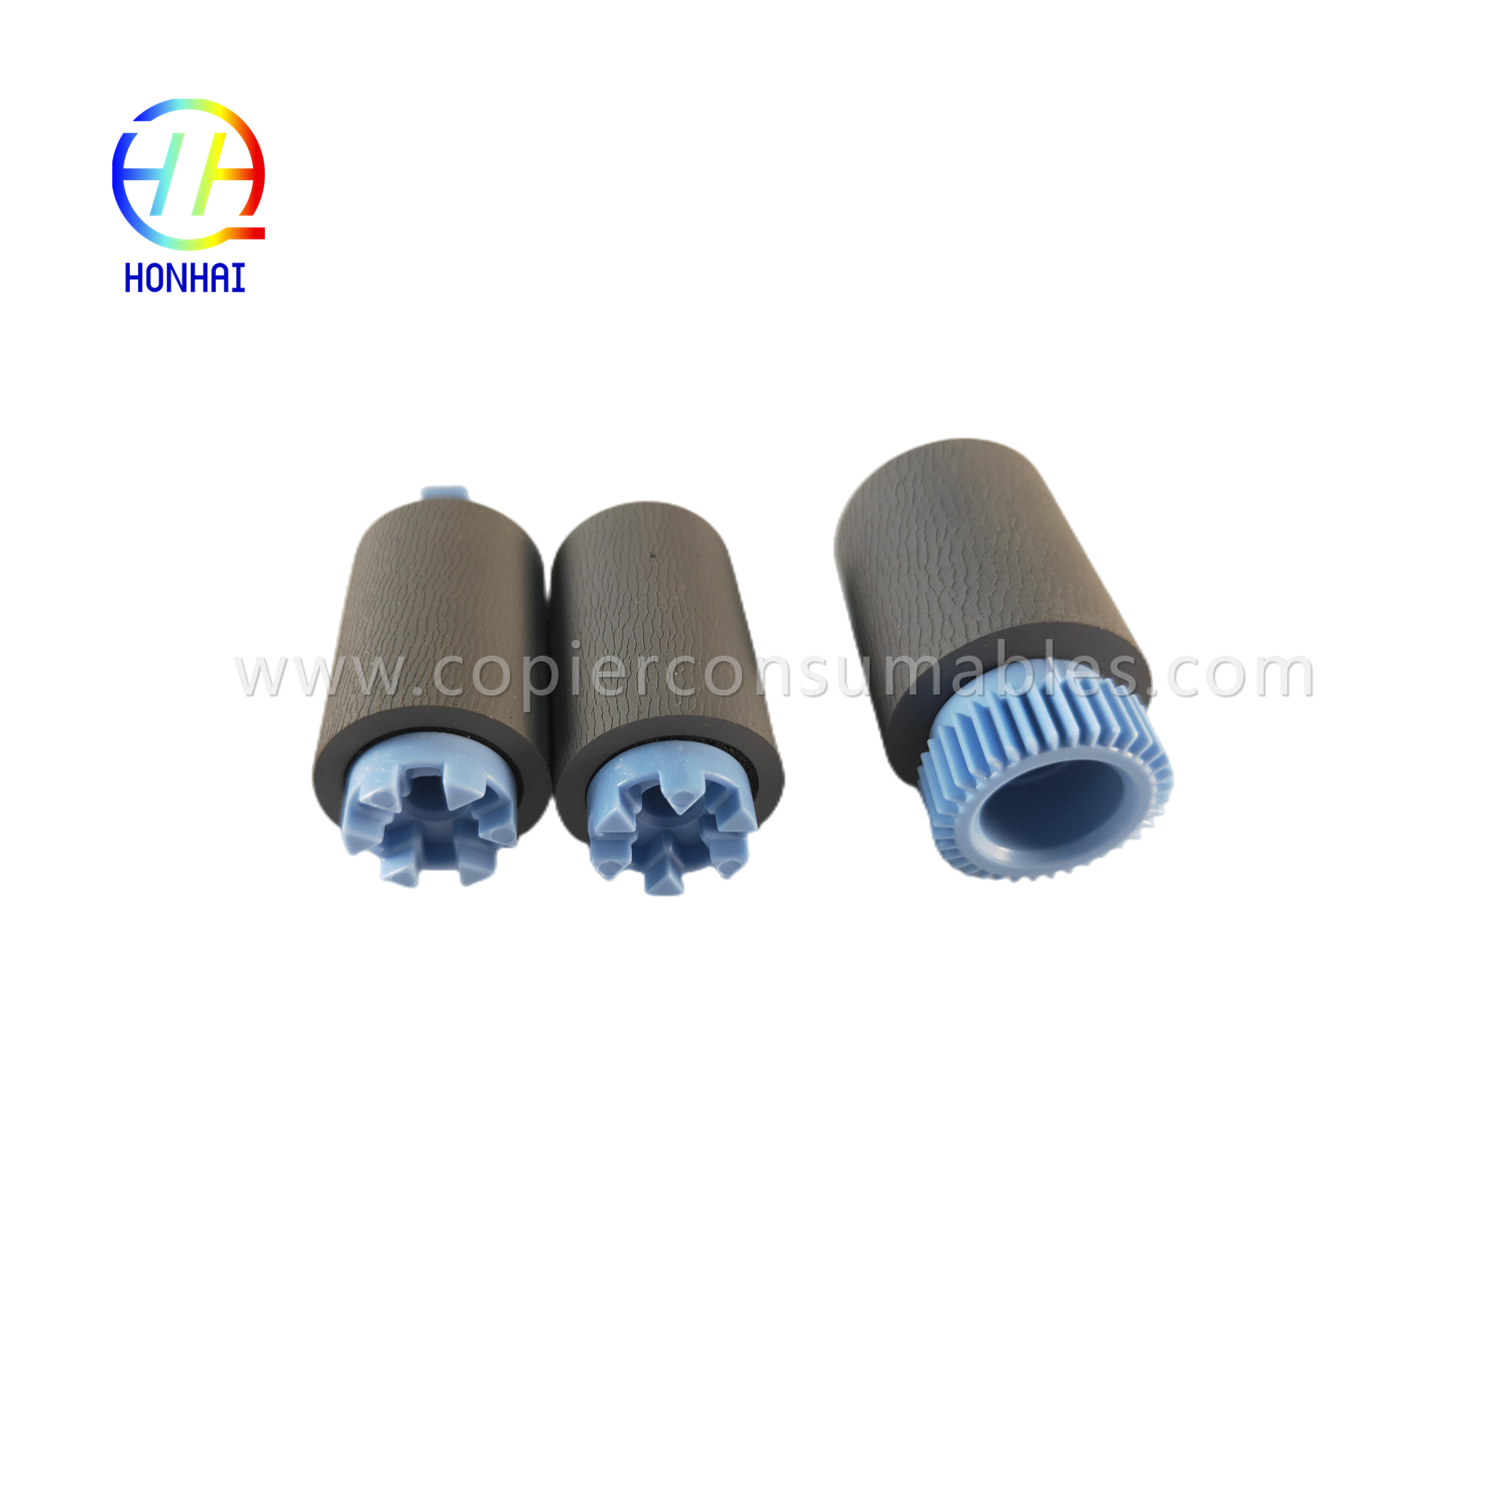 https://www.copierconsumables.com/tray-2-5-pickup-feed-separation-roller-set-for-hp-a7w93-67082-mfp-785f-780dn-e77650z-e77660z-e77650dn-e77660dn-p77740dn- p77750z-p77760z-p75050dn-p75050dw-prodotto/